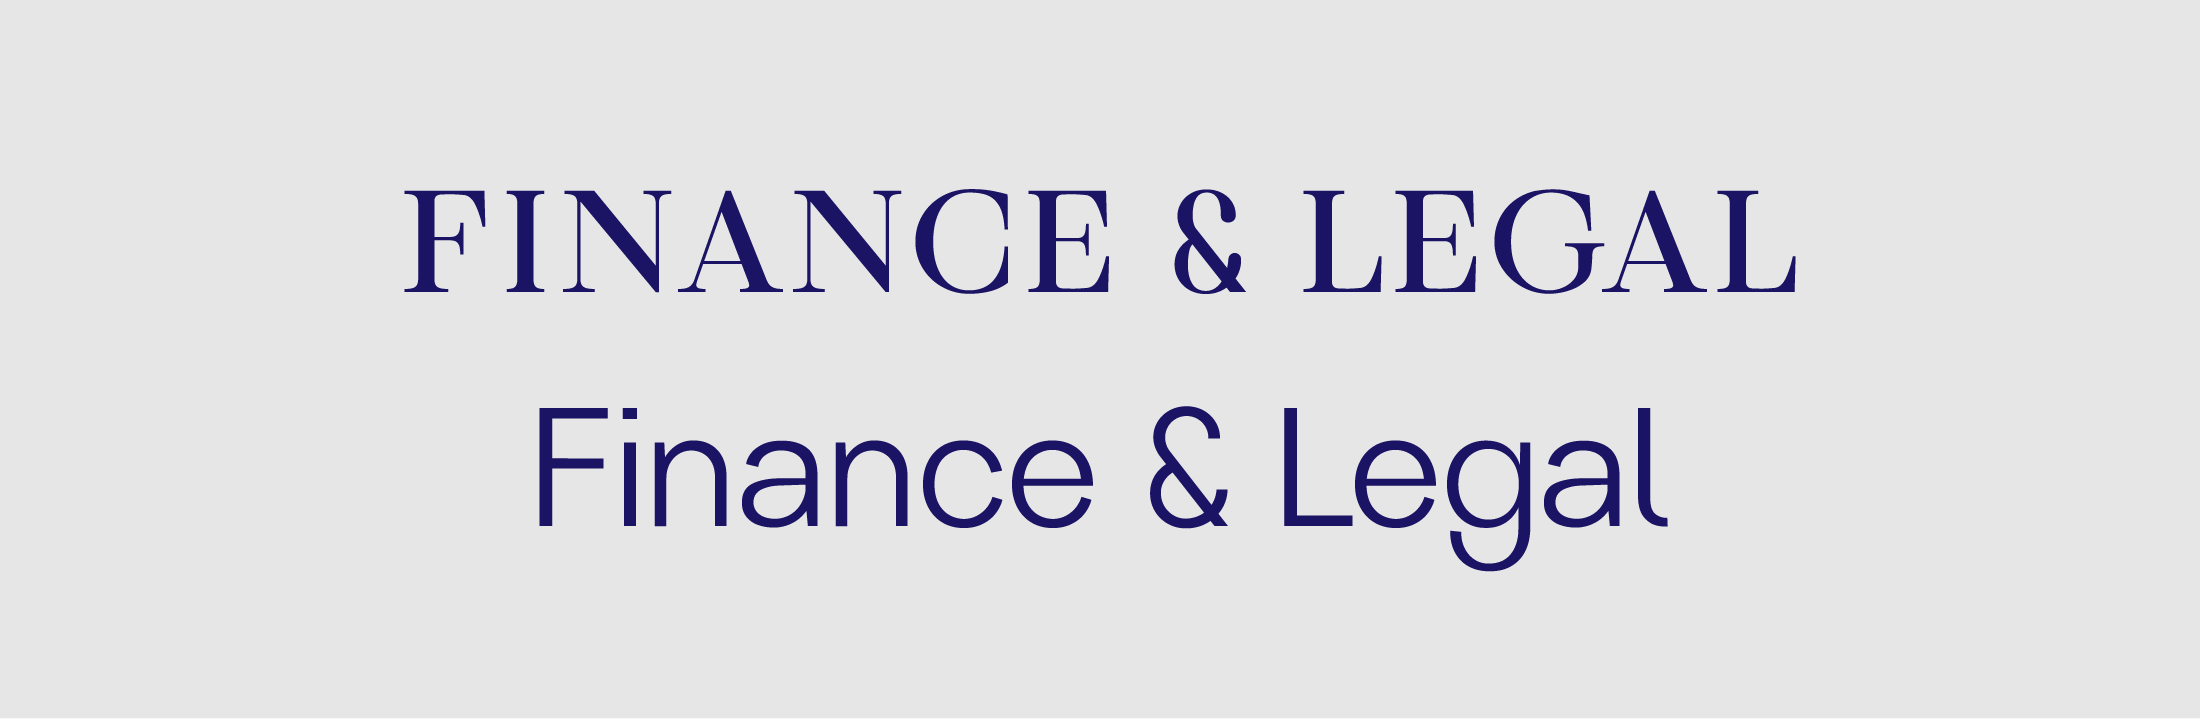 font for finance and legal logo designs